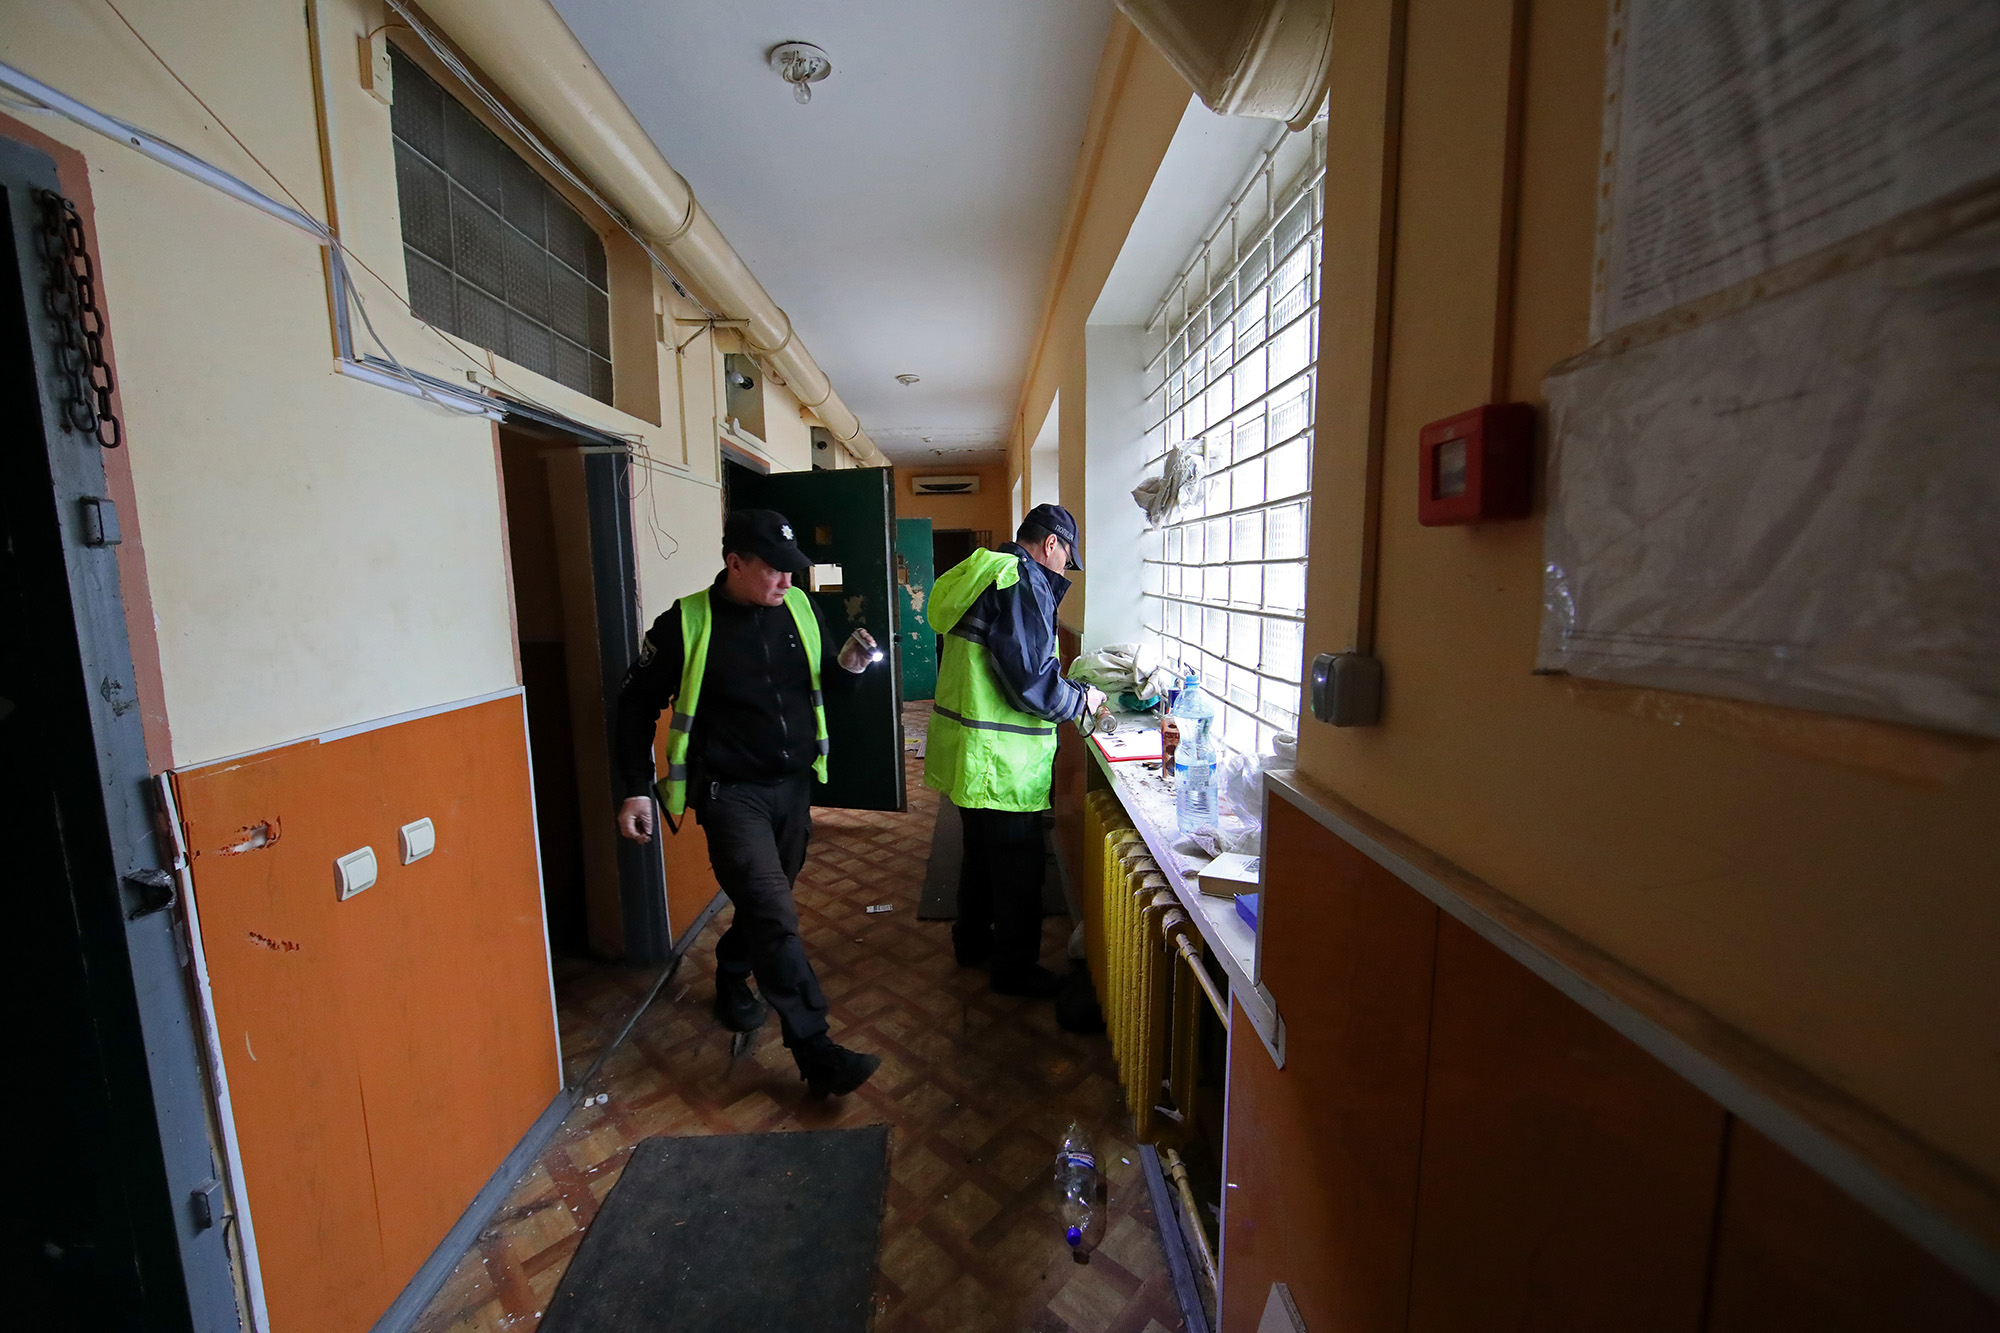 Forensic experts collect the pieces of evidence at the District Police Department used by Russian forces for torture in Balakliia, Ukraine in the Kharkiv Region on September 13. 